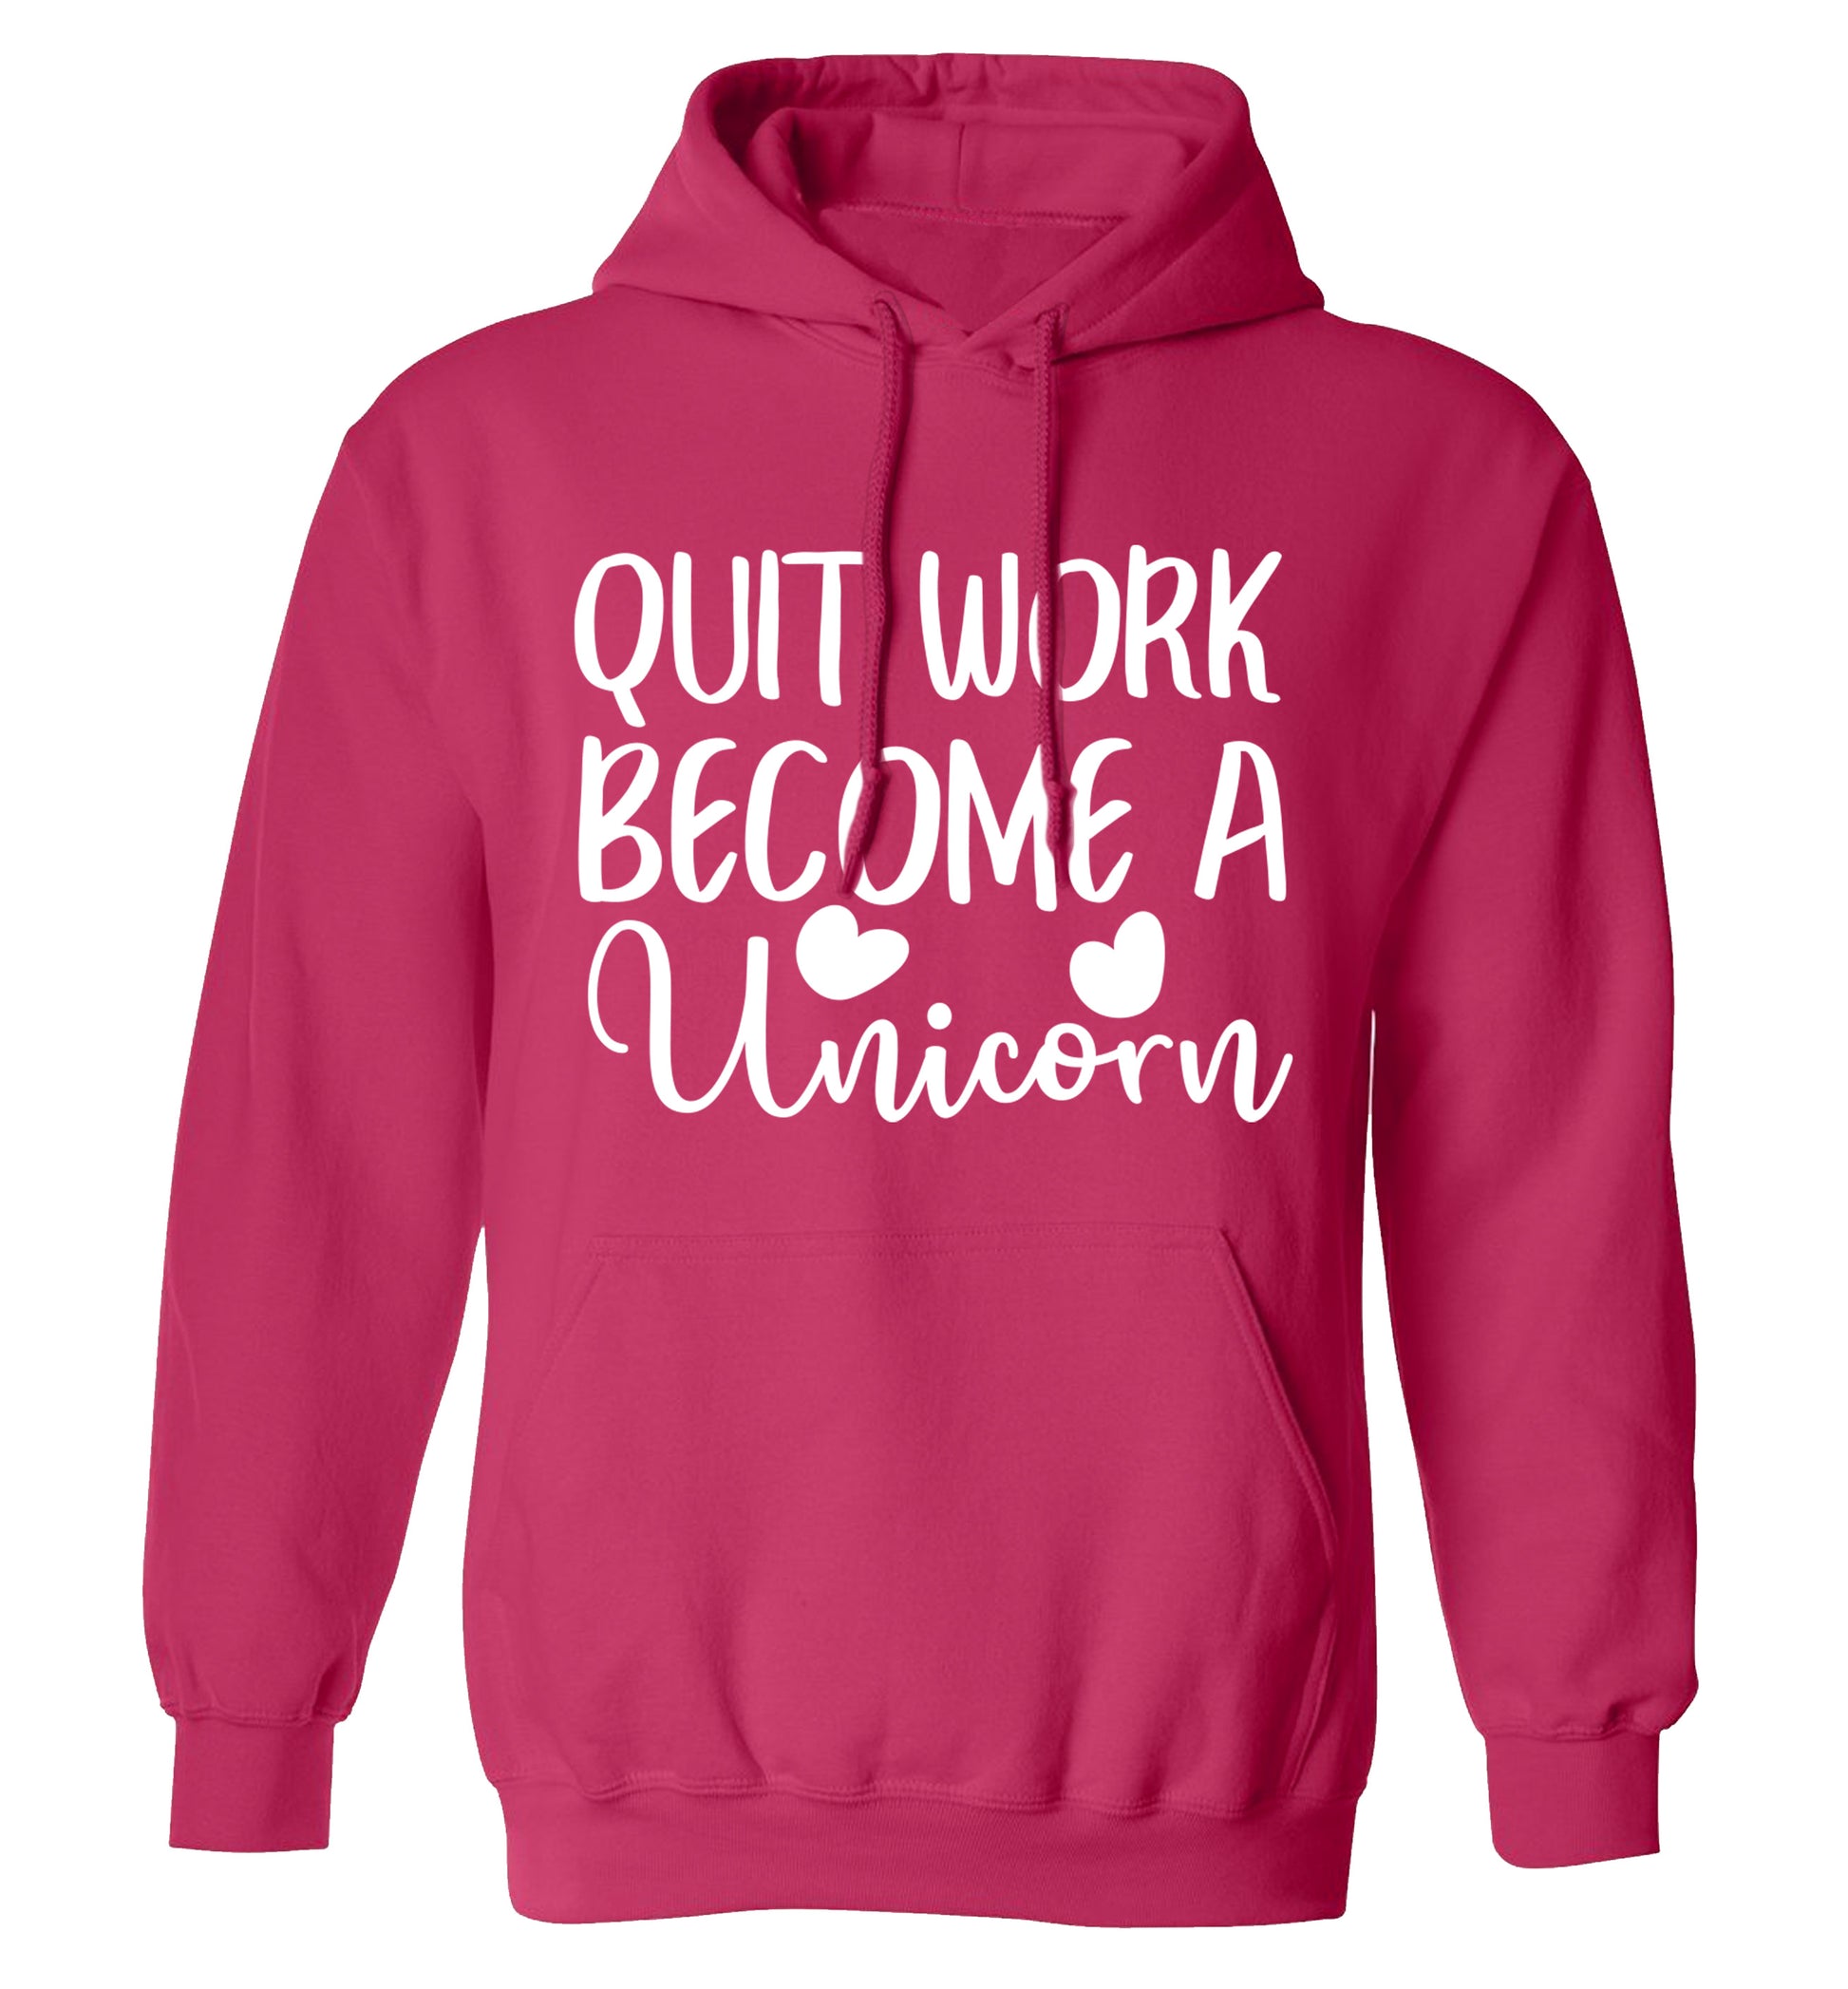 Quit work become a unicorn adults unisex pink hoodie 2XL